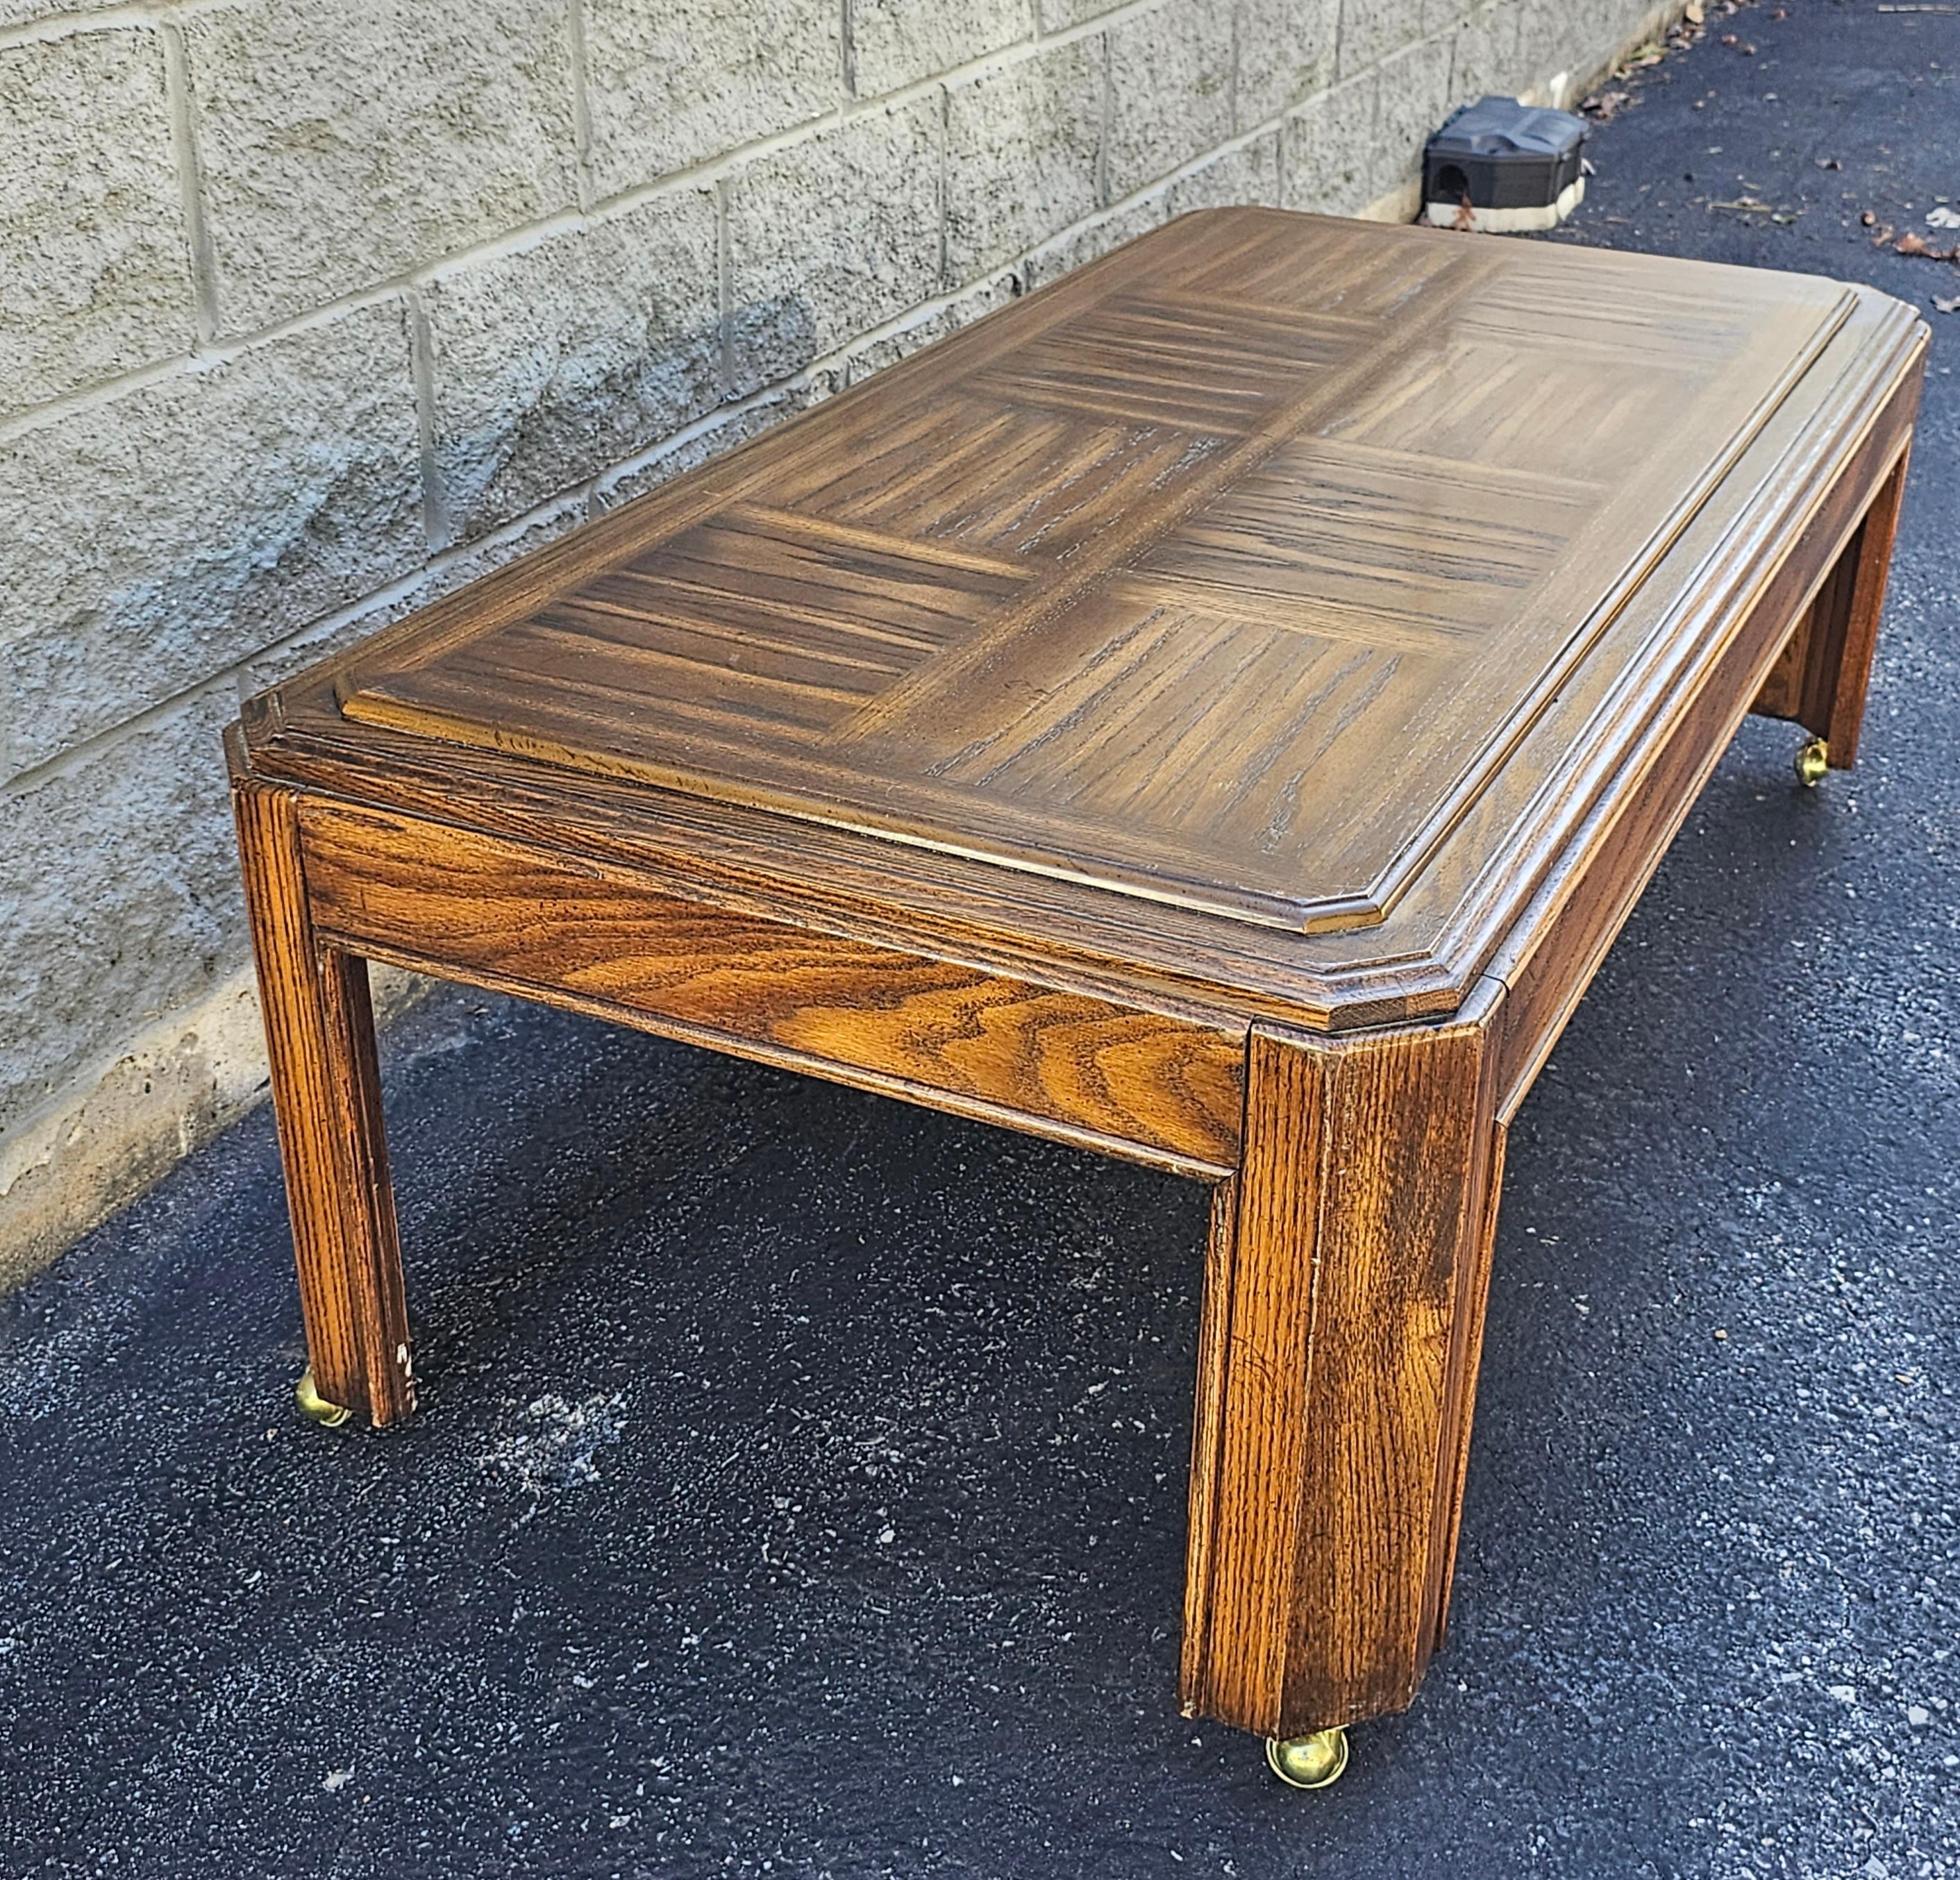 A late 20th Century Oak Parquet coffee table on casters in great vintage condition.
Measures 52